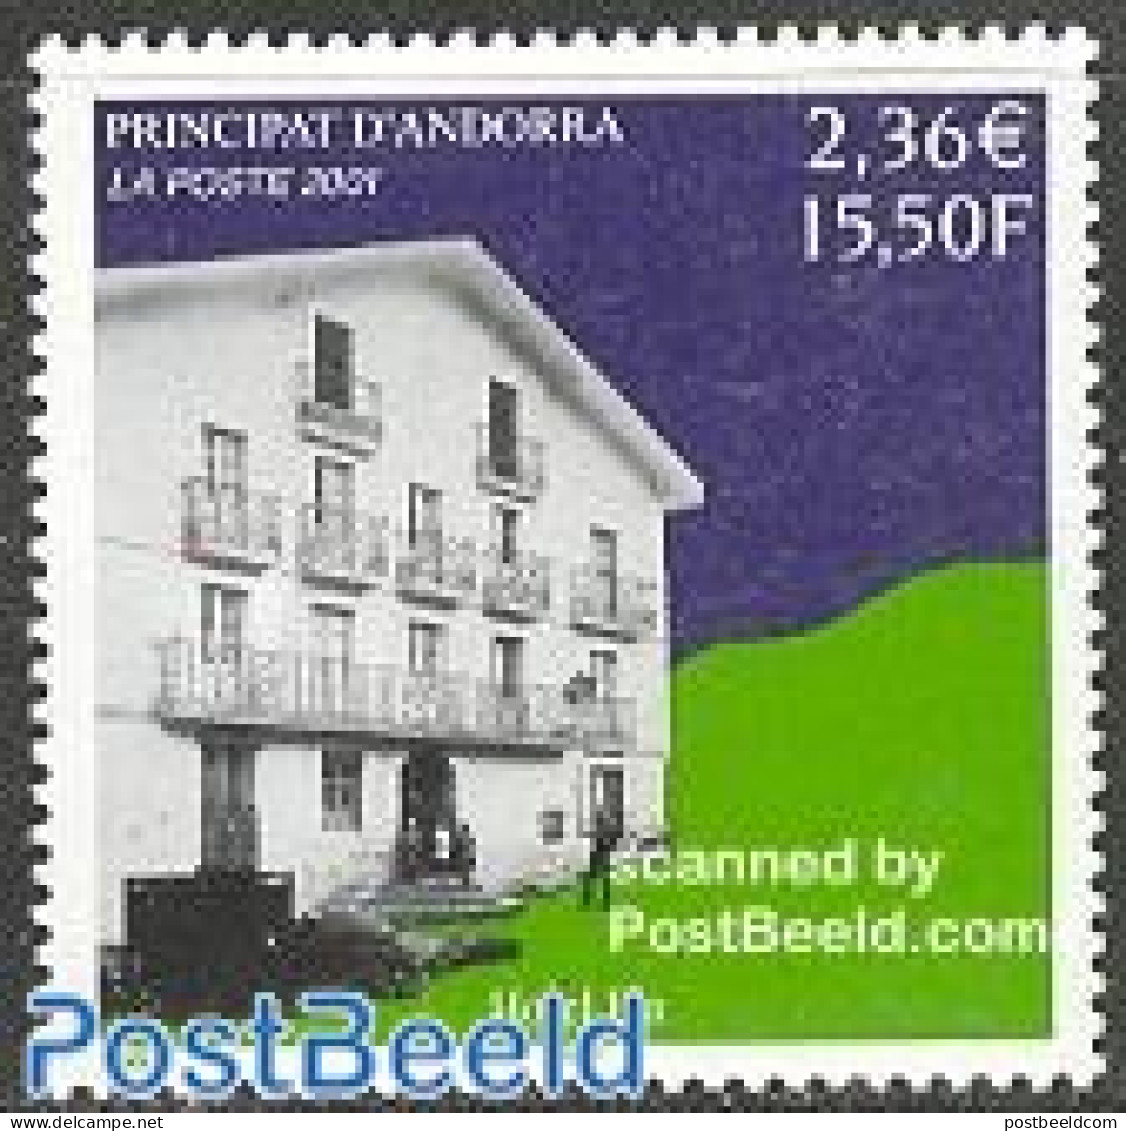 Andorra, French Post 2001 Hotel Pla 1v, Mint NH, Various - Hotels - Tourism - Art - Architecture - Neufs